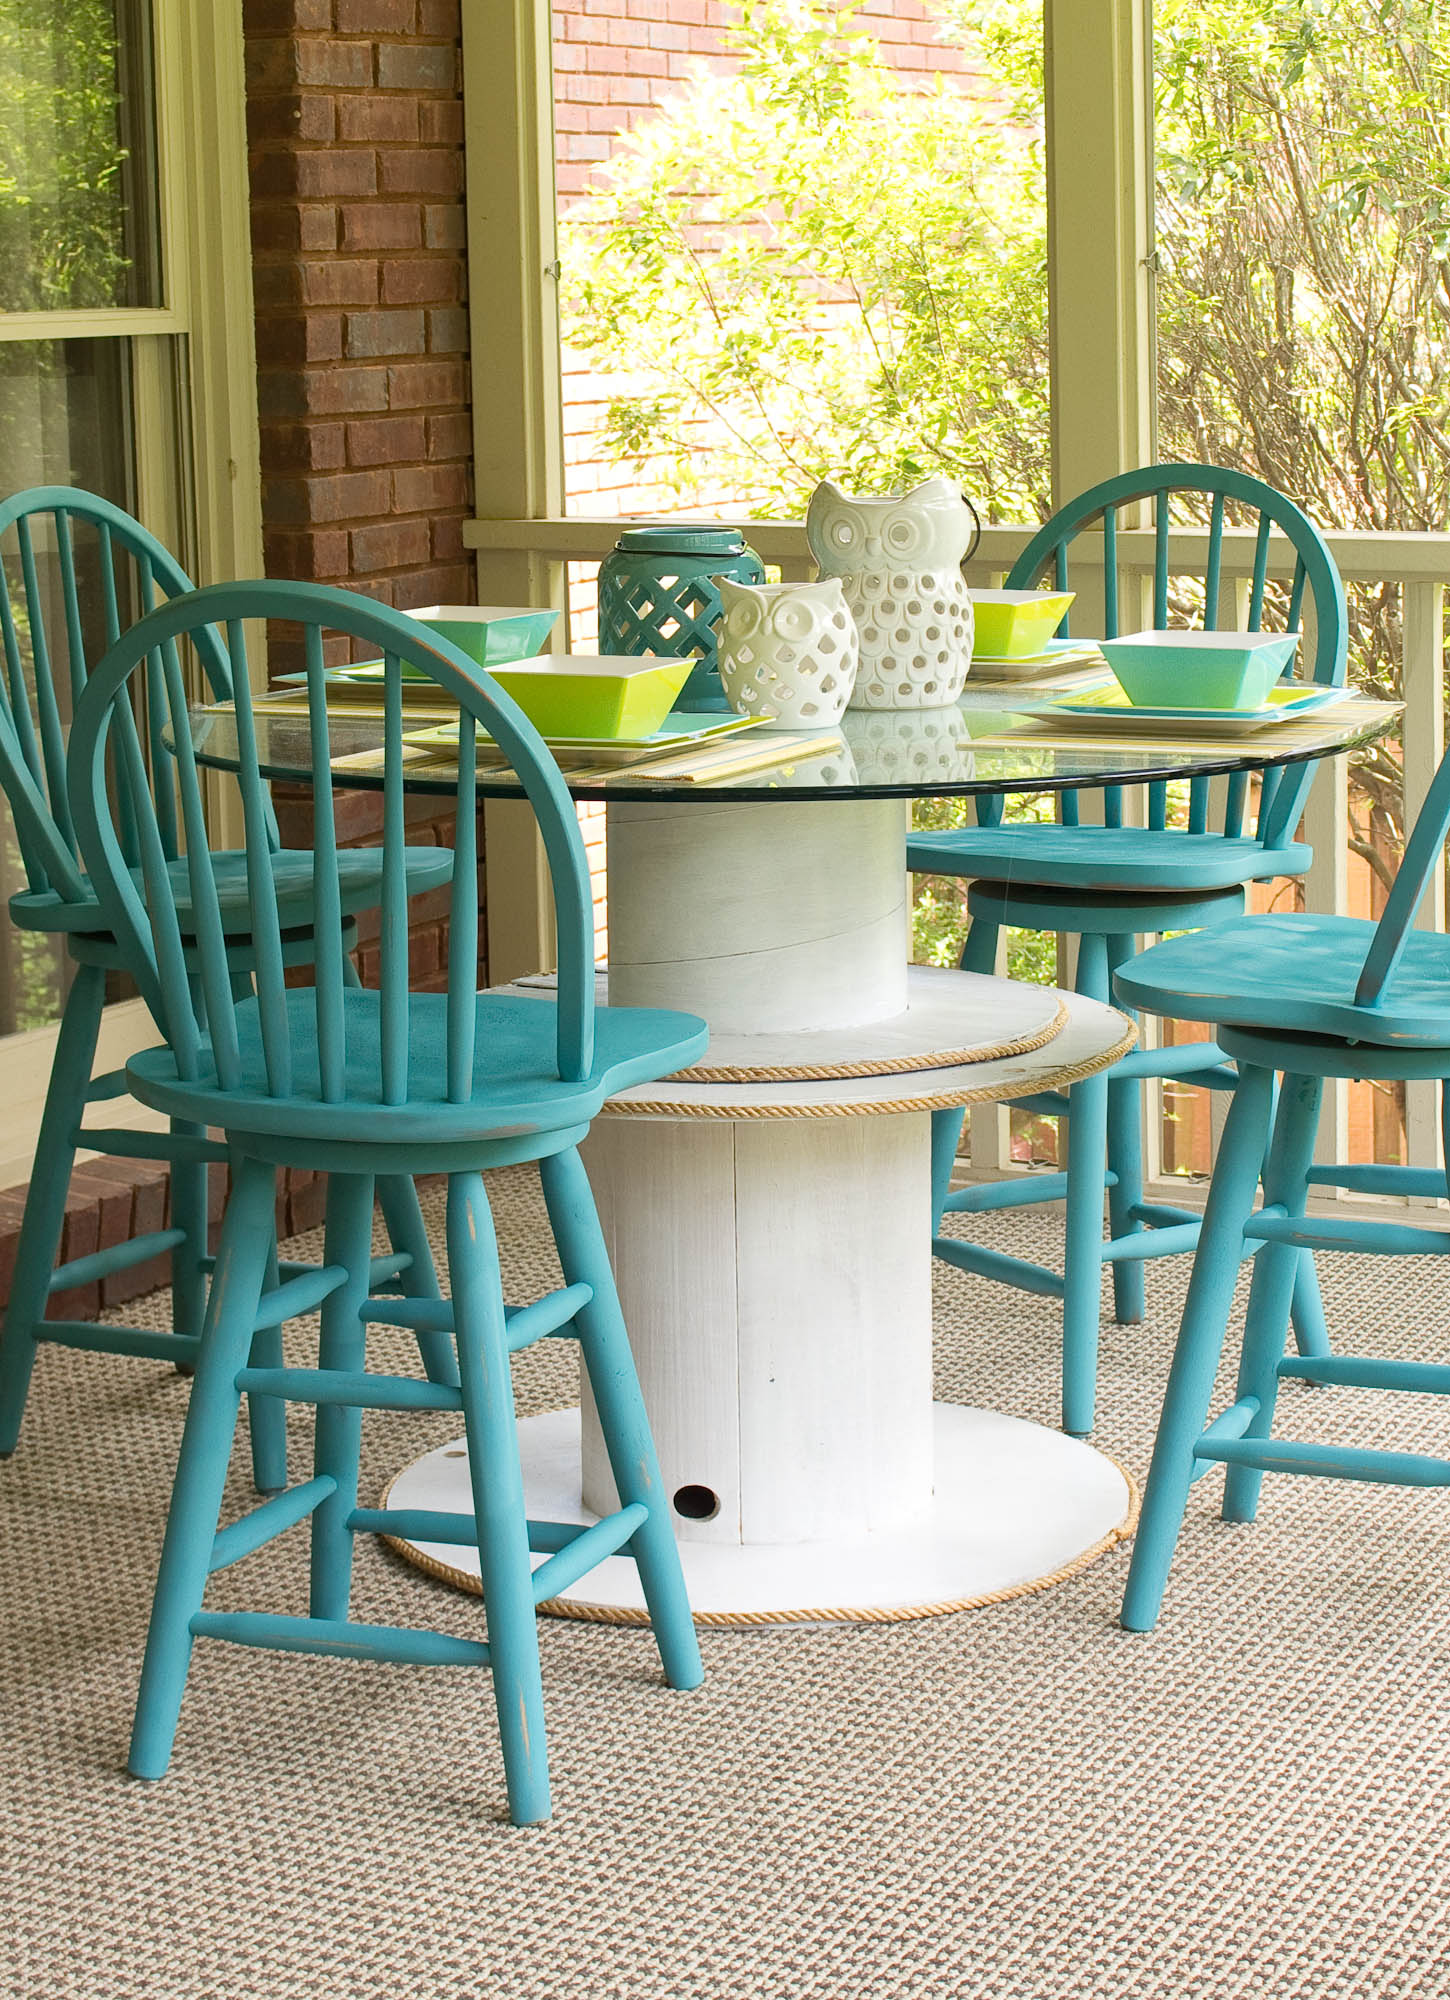 OE Features Wire Spool Outdoor Table at Savvy Apron